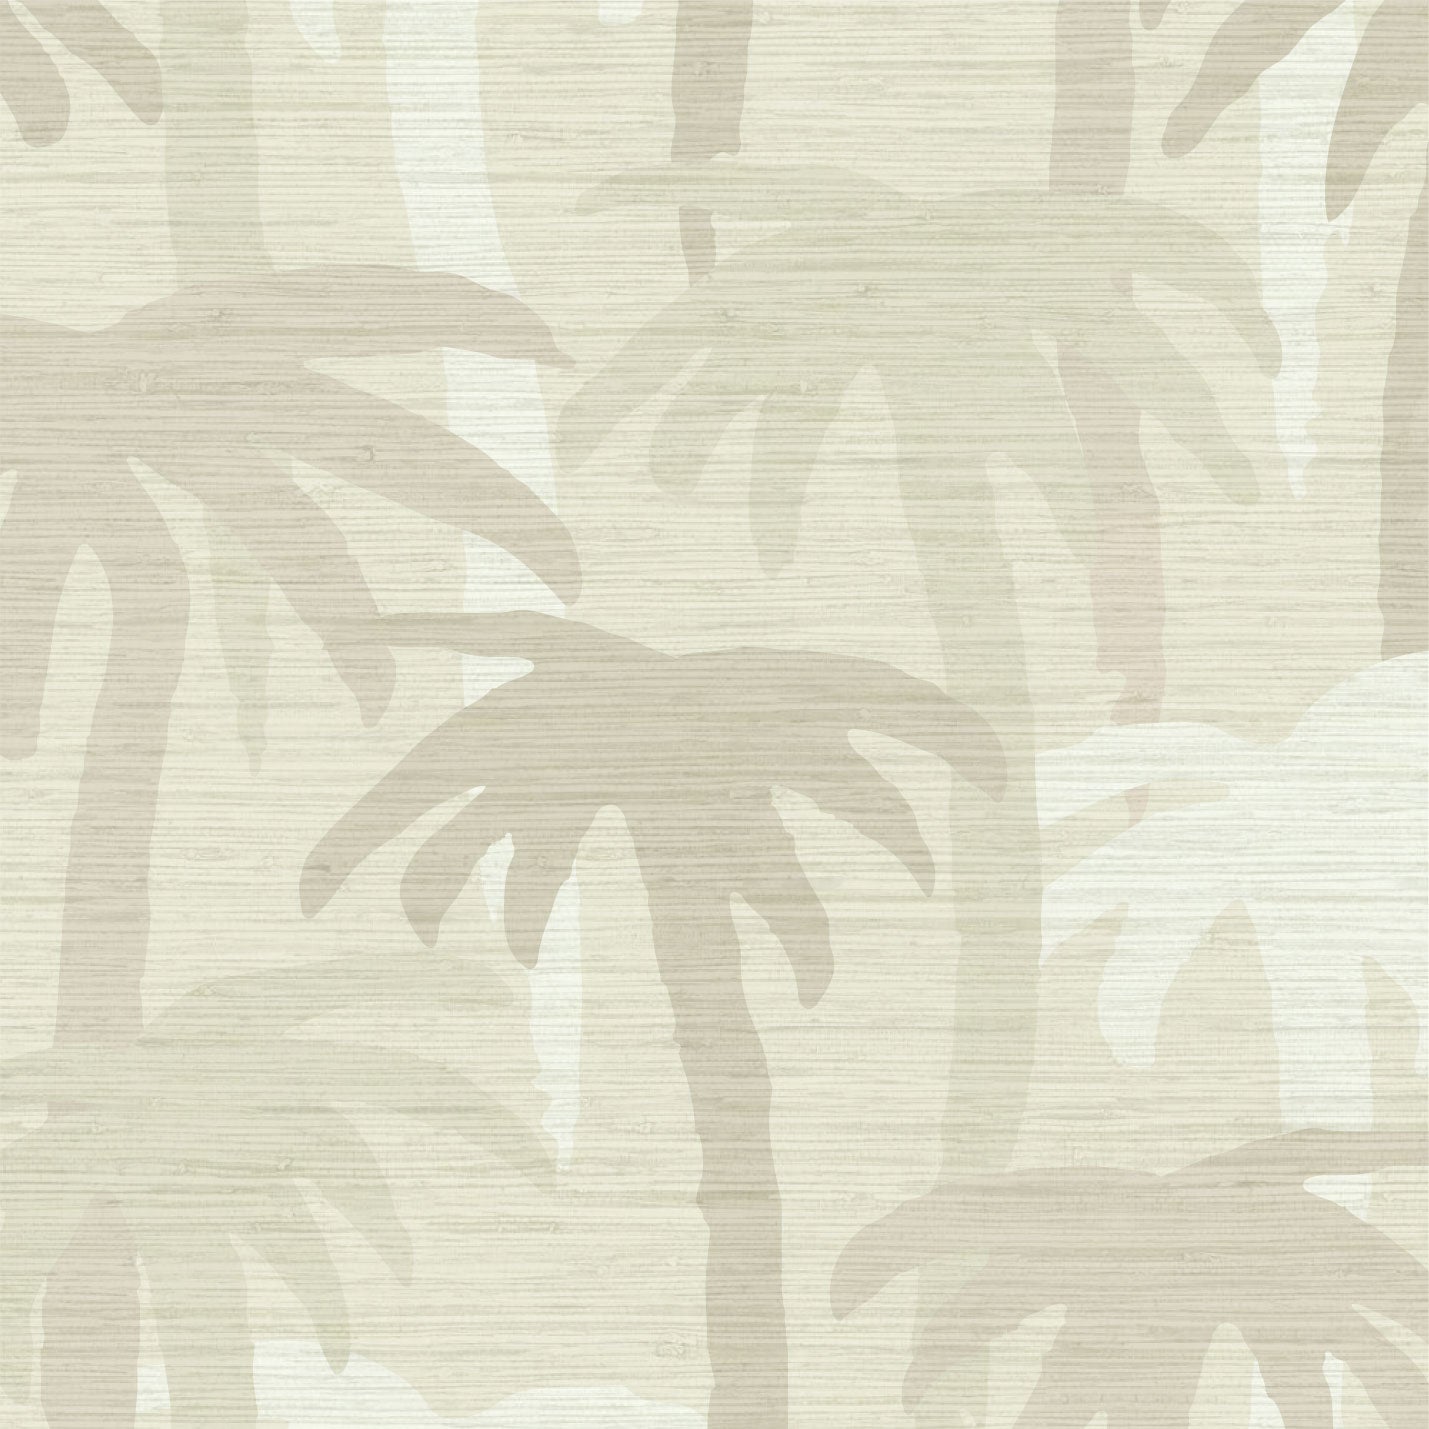 grasscloth printed wallpaper on a tan, sand colored base with shades of tan, light brown, beige and white single colored palm trees overlapped to form a linear palm print inspired by late 1980s and early 1990s Southern California Surf graphics